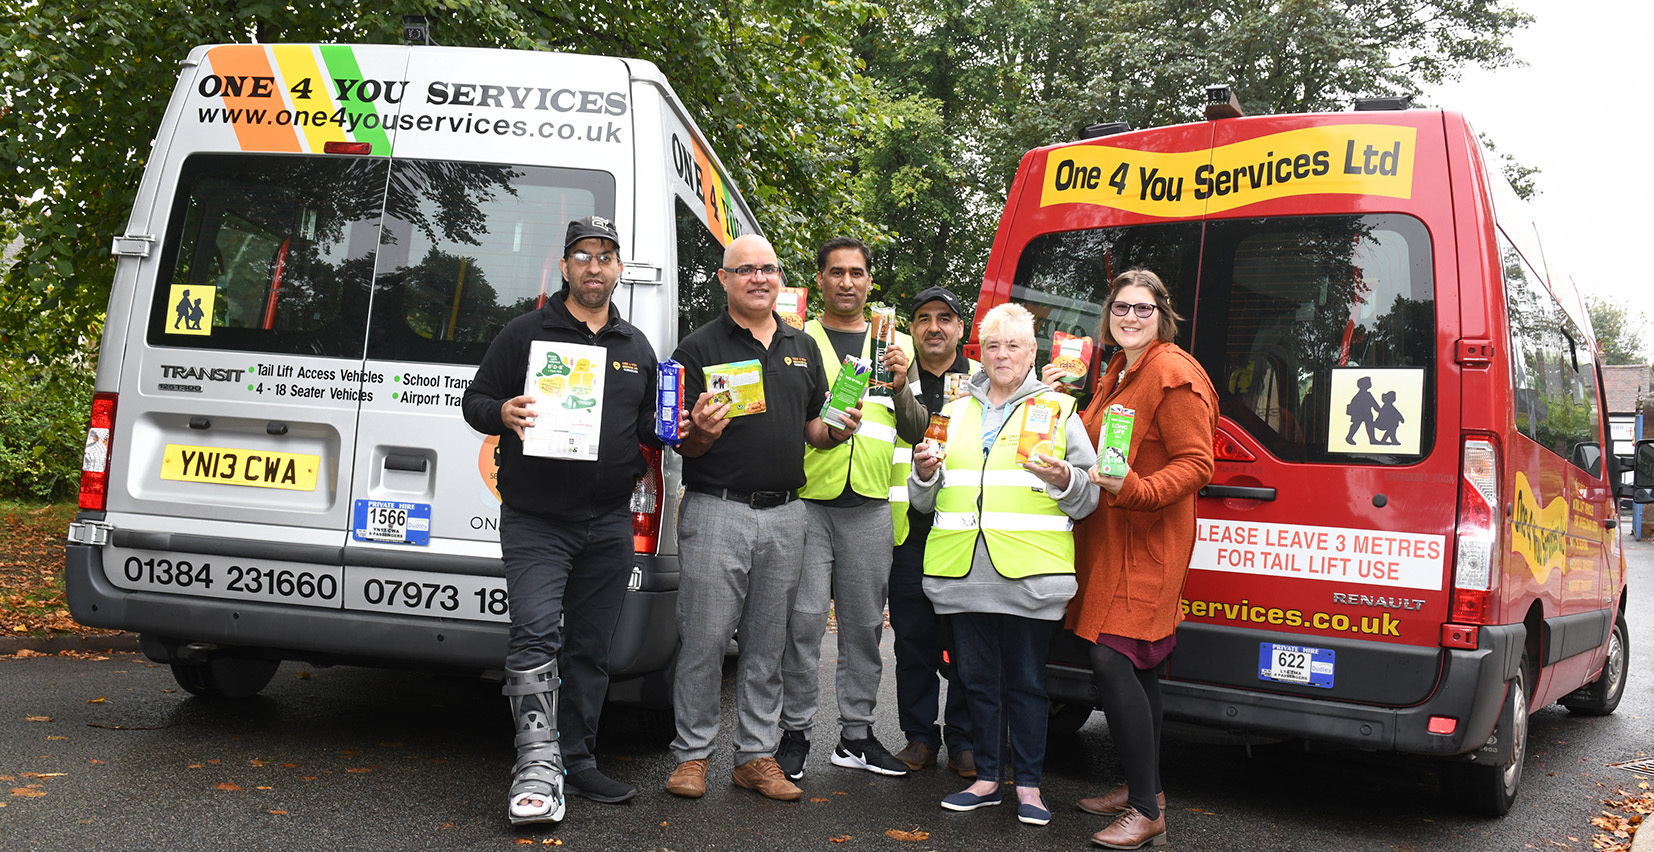 Abrar Ahmed (second from left) with Dudley Council’s Bryoni Barbosa (right) and the One 4 You management team